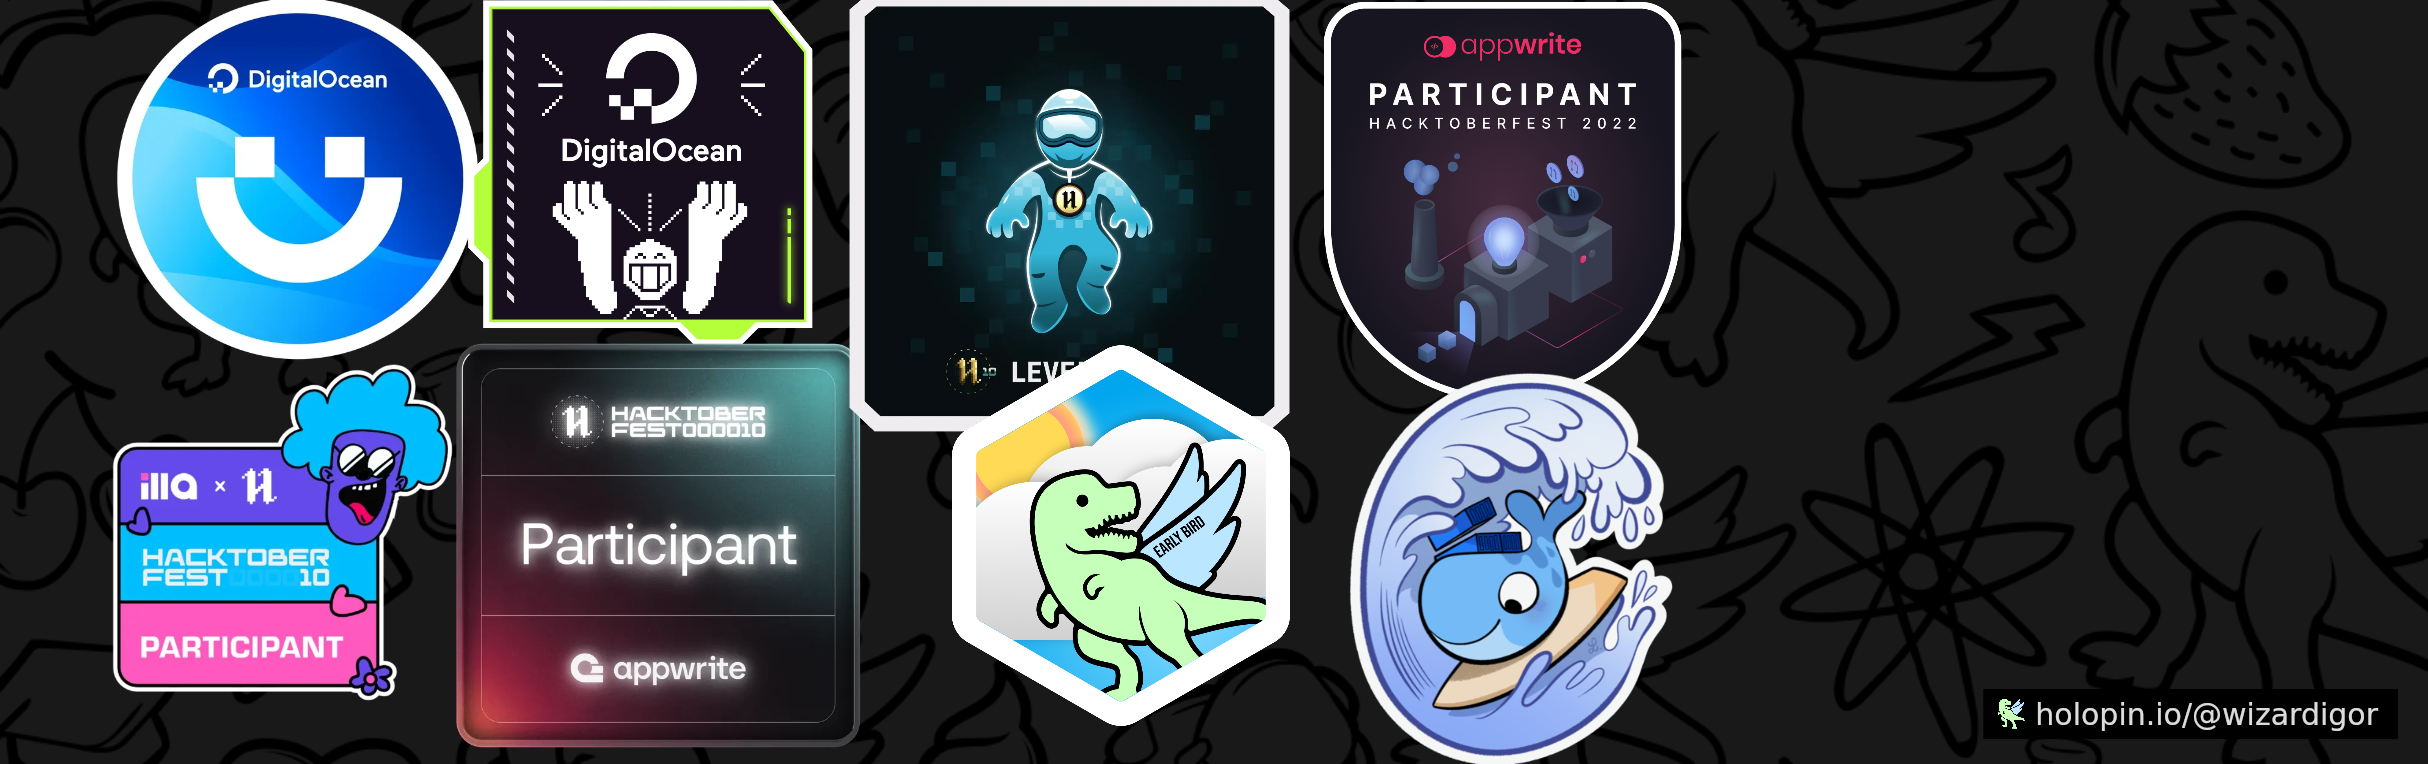 An image of @wizardigor's Holopin badges, which is a link to view their full Holopin profile